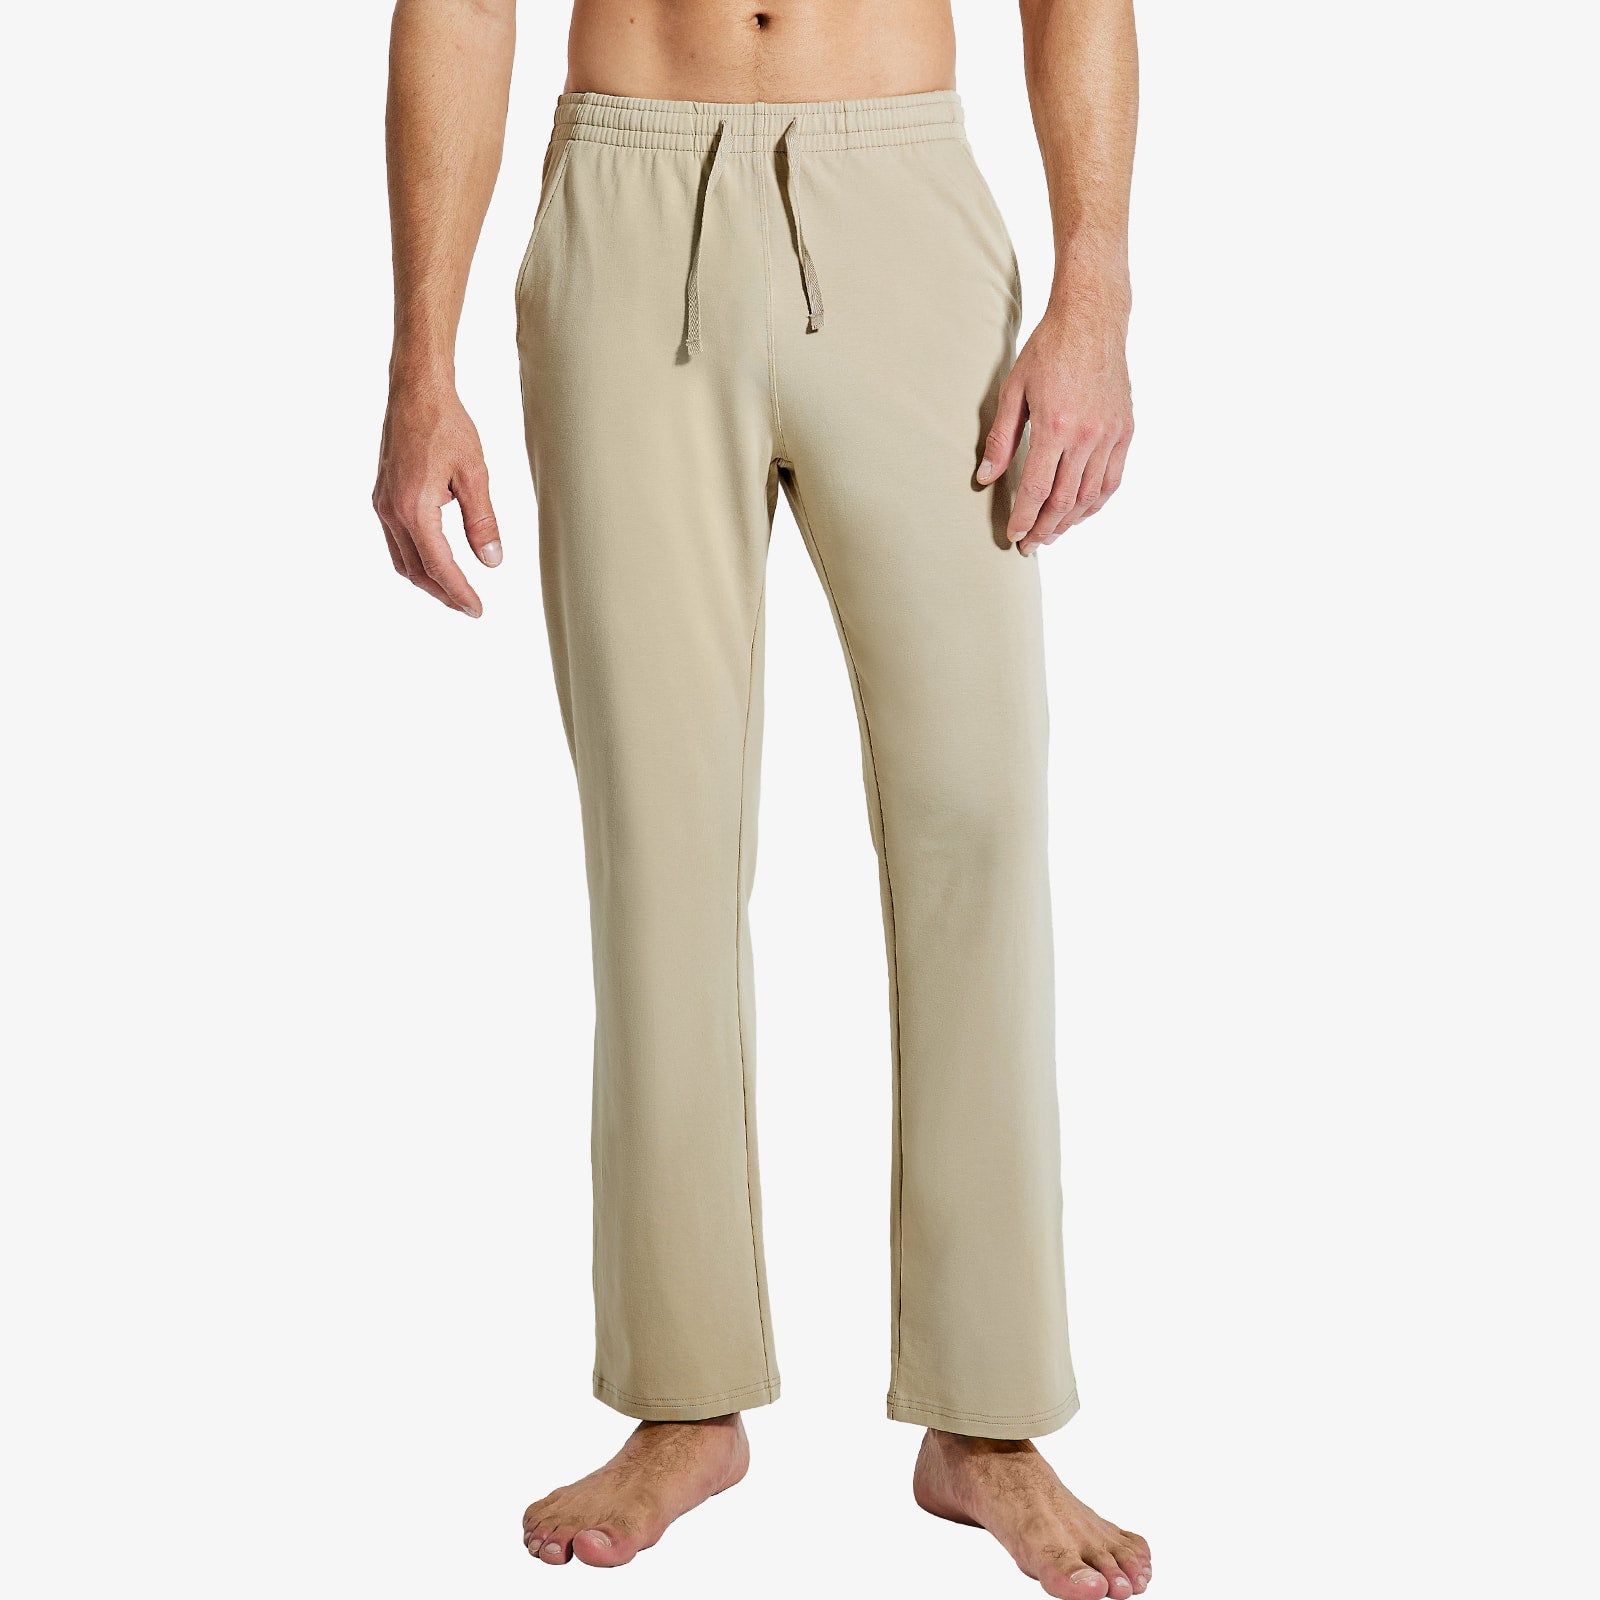 Buy White Trousers & Pants for Men by NETPLAY Online | Ajio.com